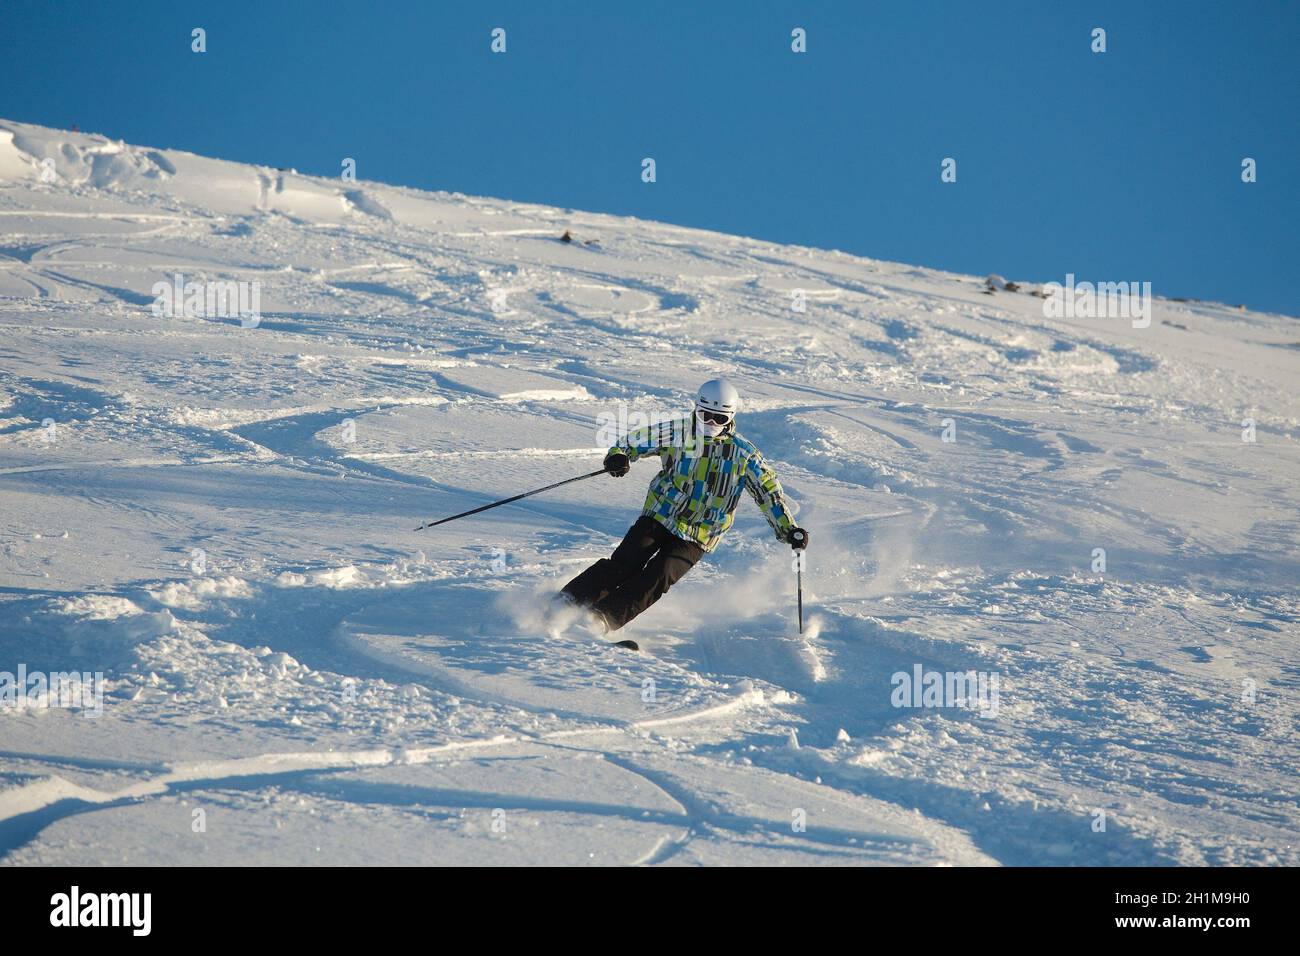 Les Orres, France - Circa 2015: Young skier coming down fast in fresh powder snow off-piste. Stock Photo